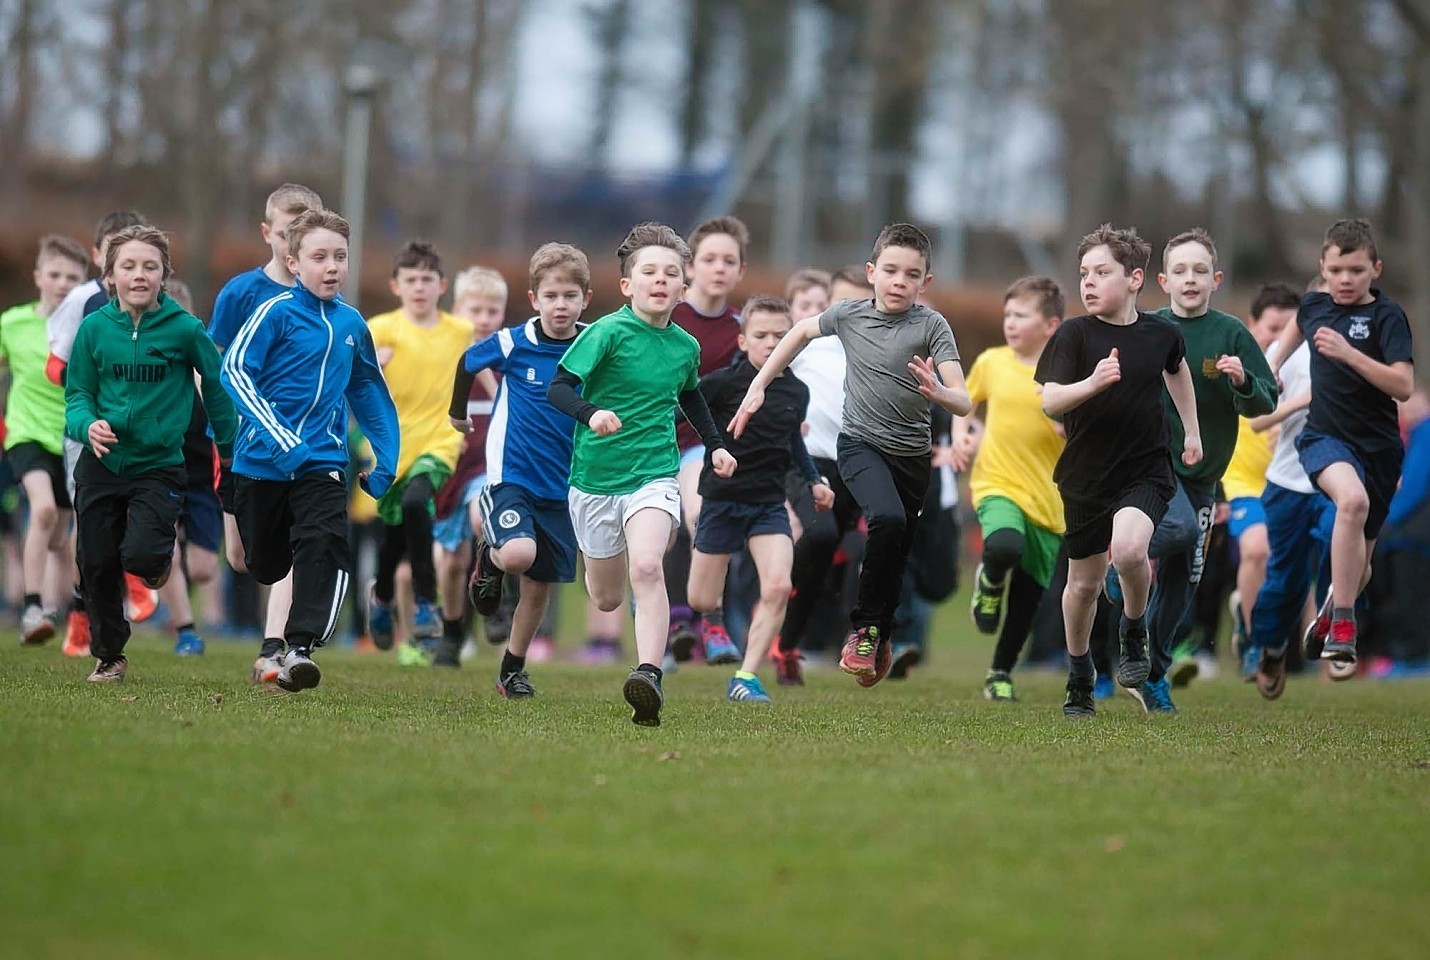 20 Moray Primary Schools are taking part in the Gordonstoun Primary Schools  Cross Country Championships at Gordonstoun school.  The event is now in its 10th.

Photo of the start of the P5 boys race